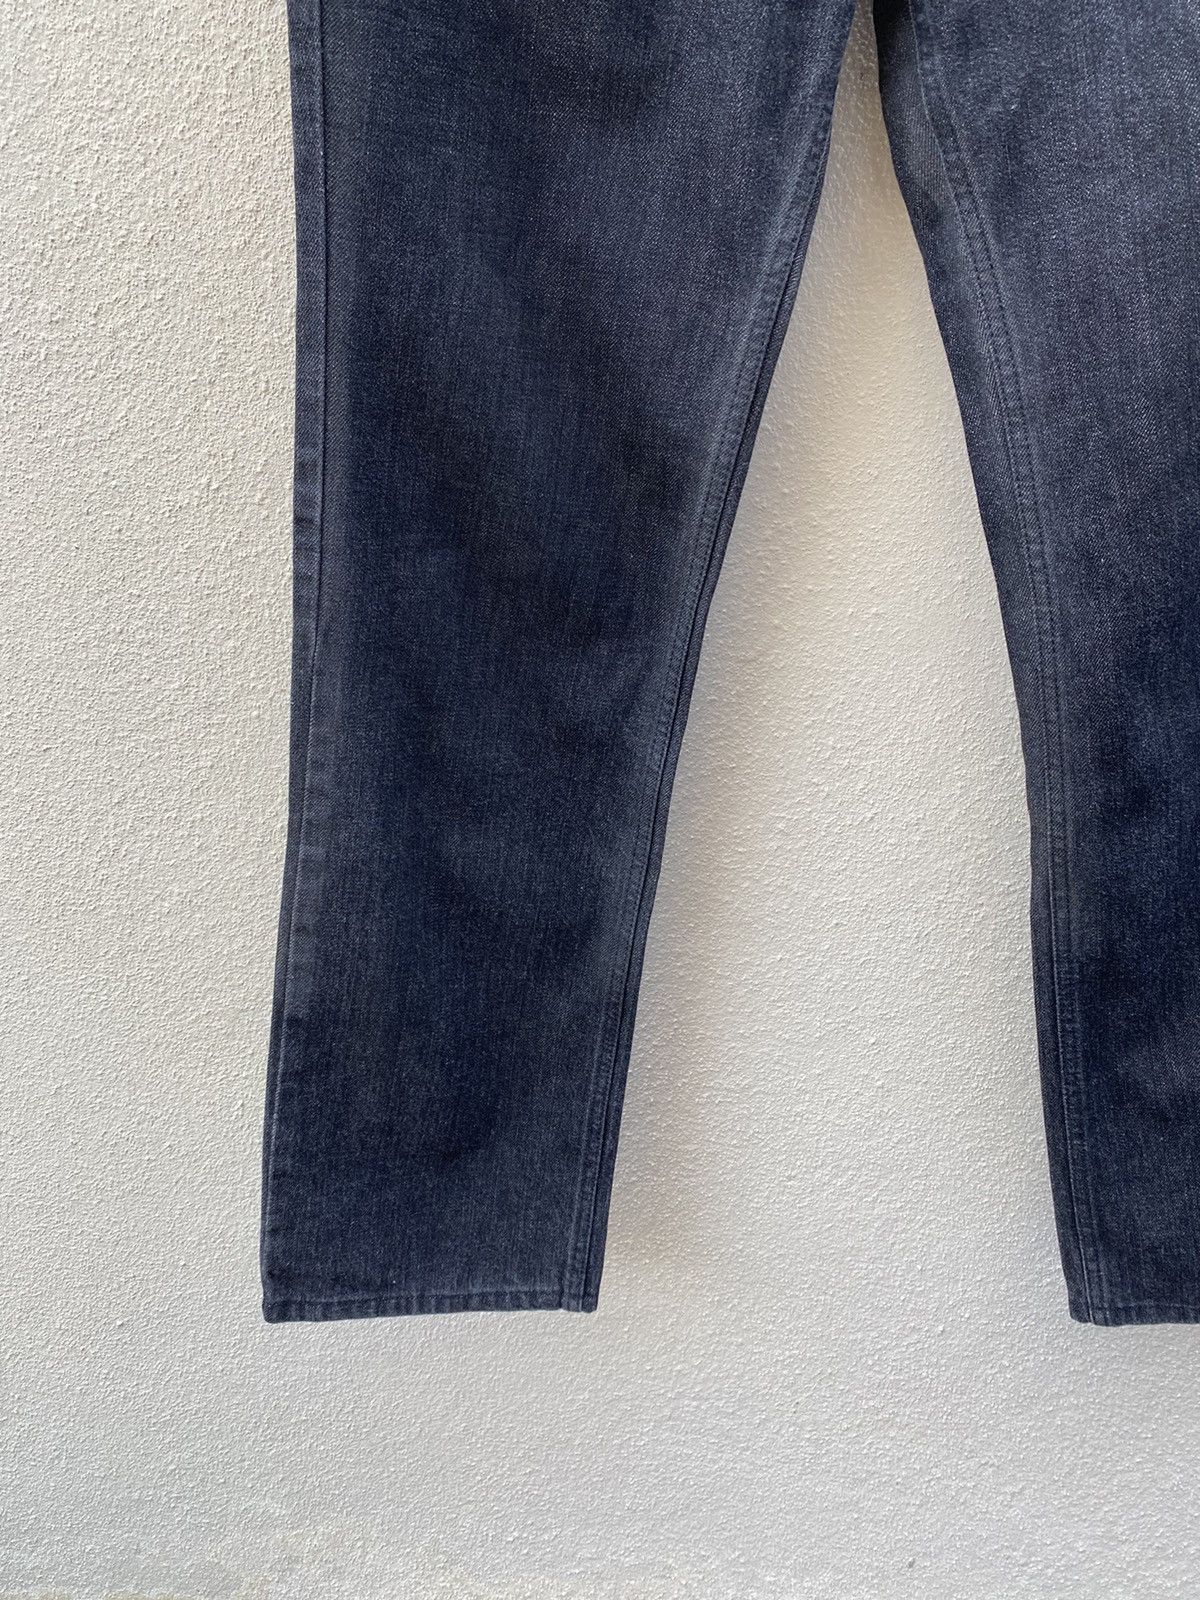 GUCCI Straight Cut Jeans Made in Italy - 3